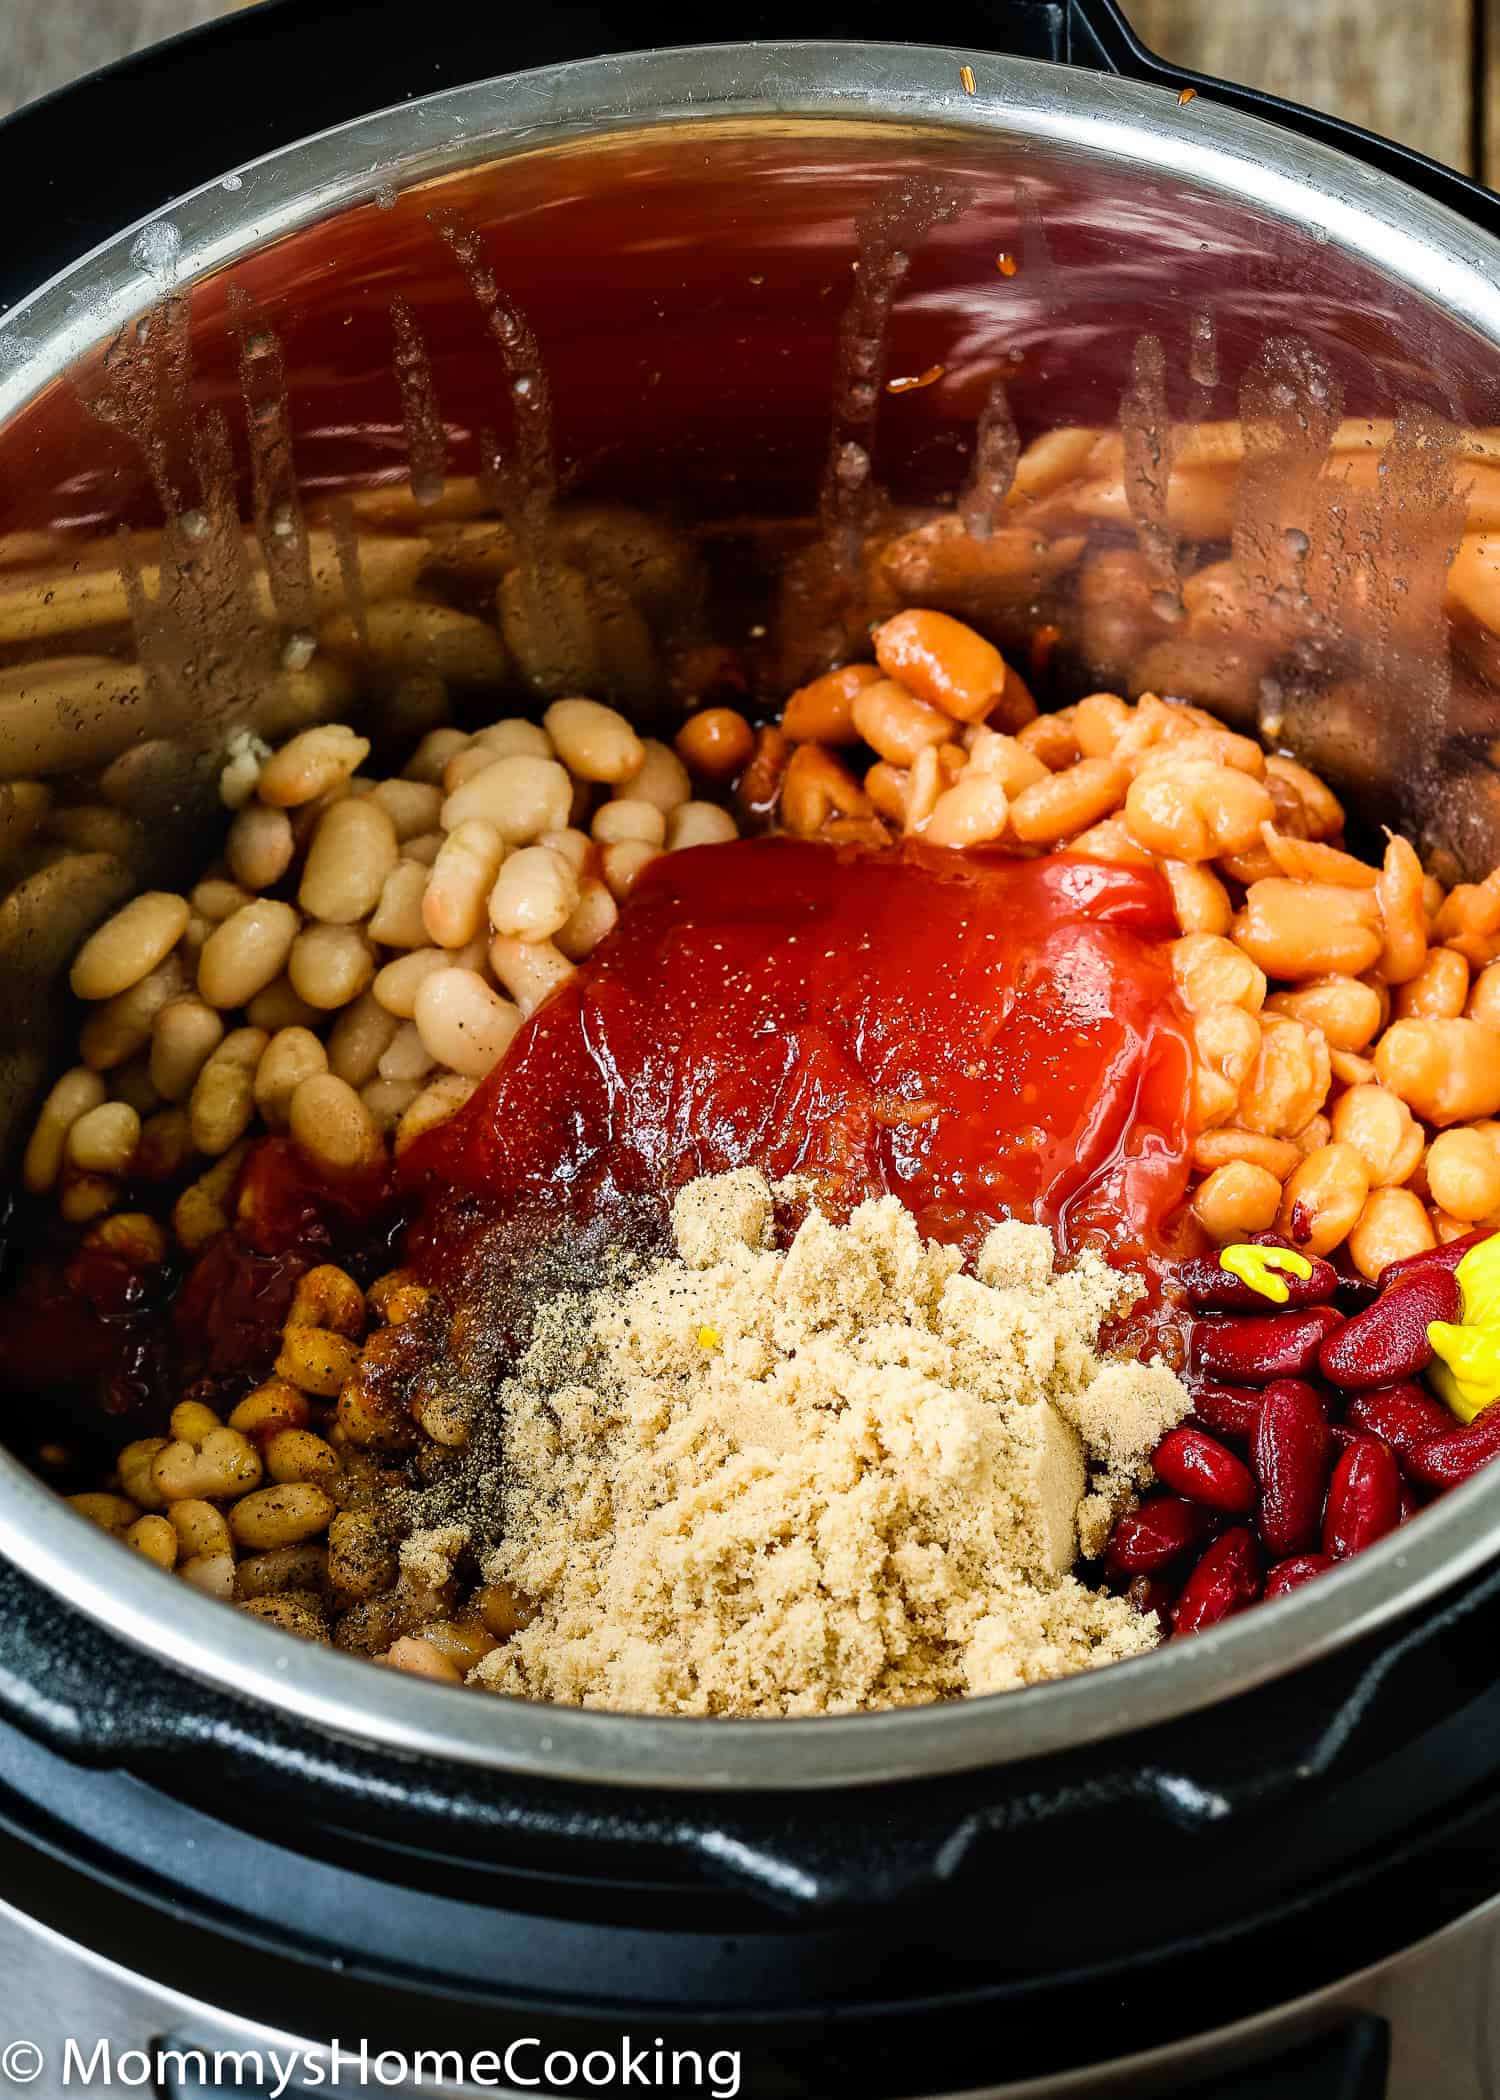 Ingredients needed to make Instant Pot Baked Beans in the instant pot.